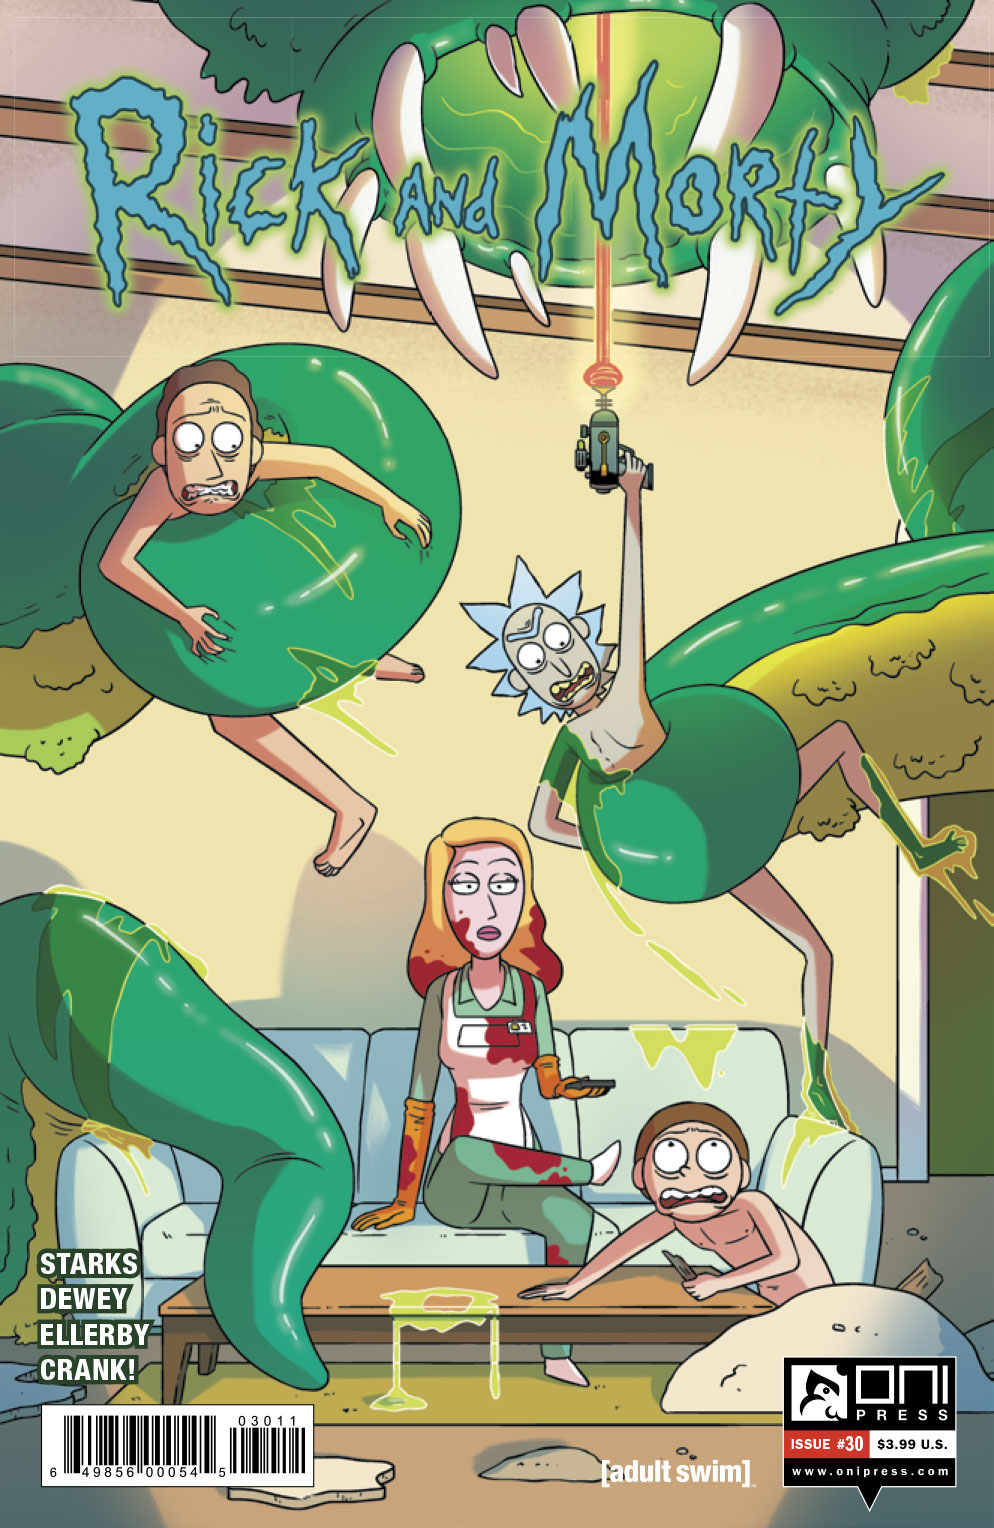 Rick and Morty #30 Review